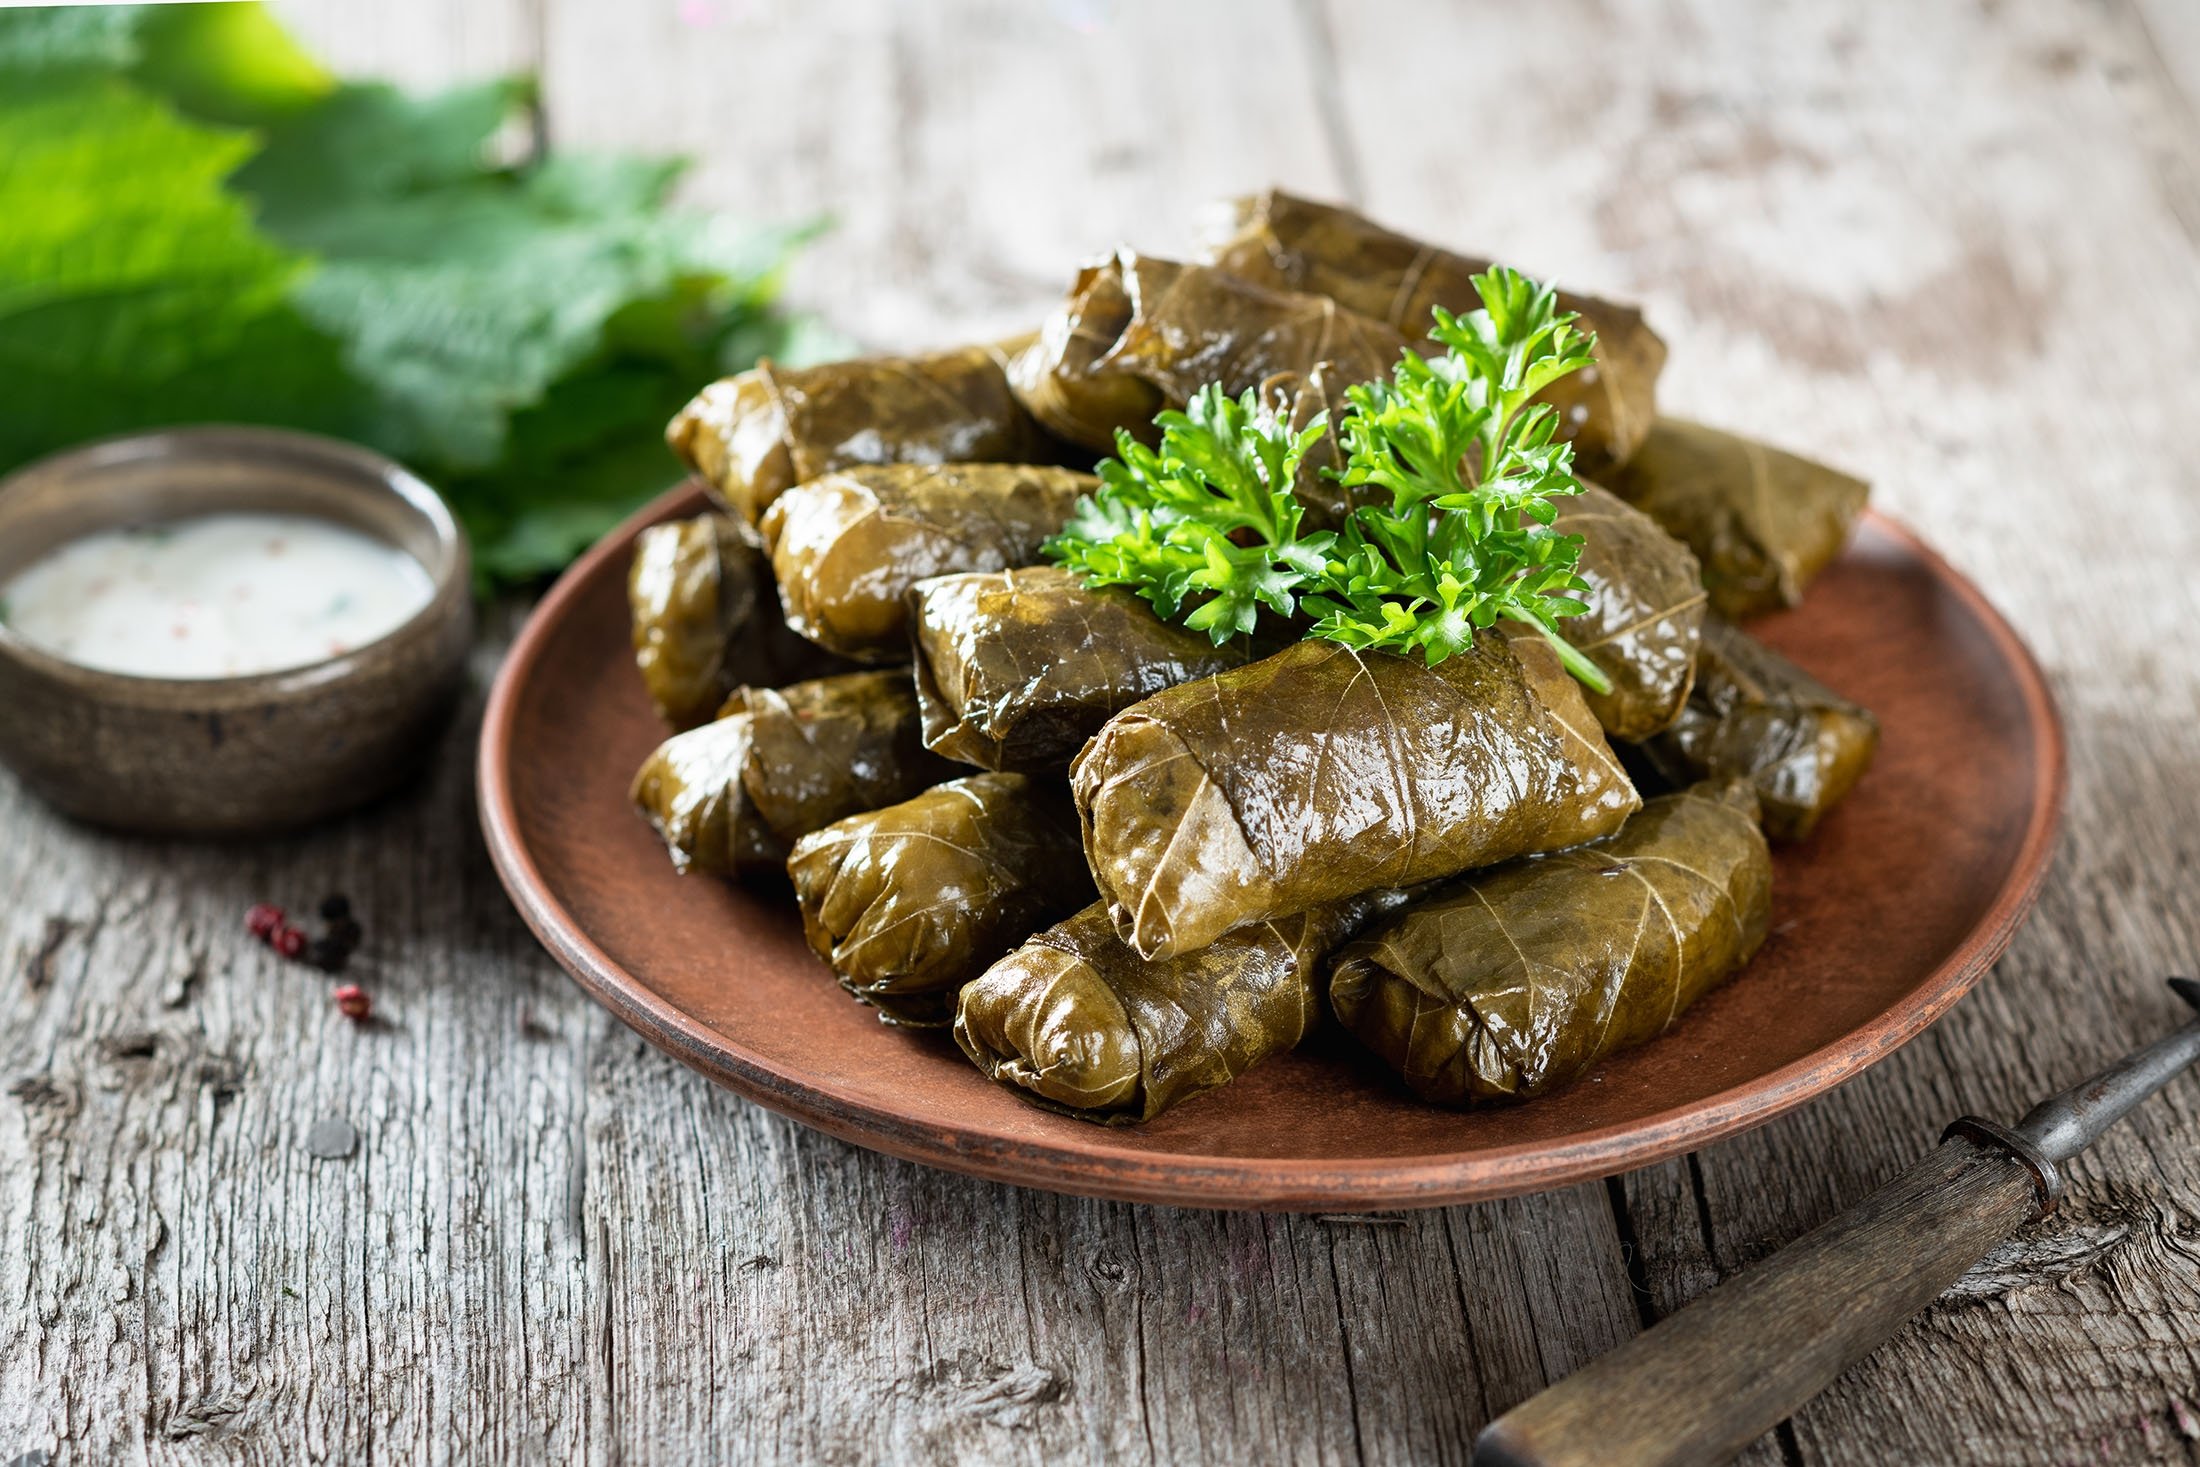 Dolma is actually widely available in markets, charcuteries and occasionally at home cooking restaurants in Turkey. (Shutterstock Photo)